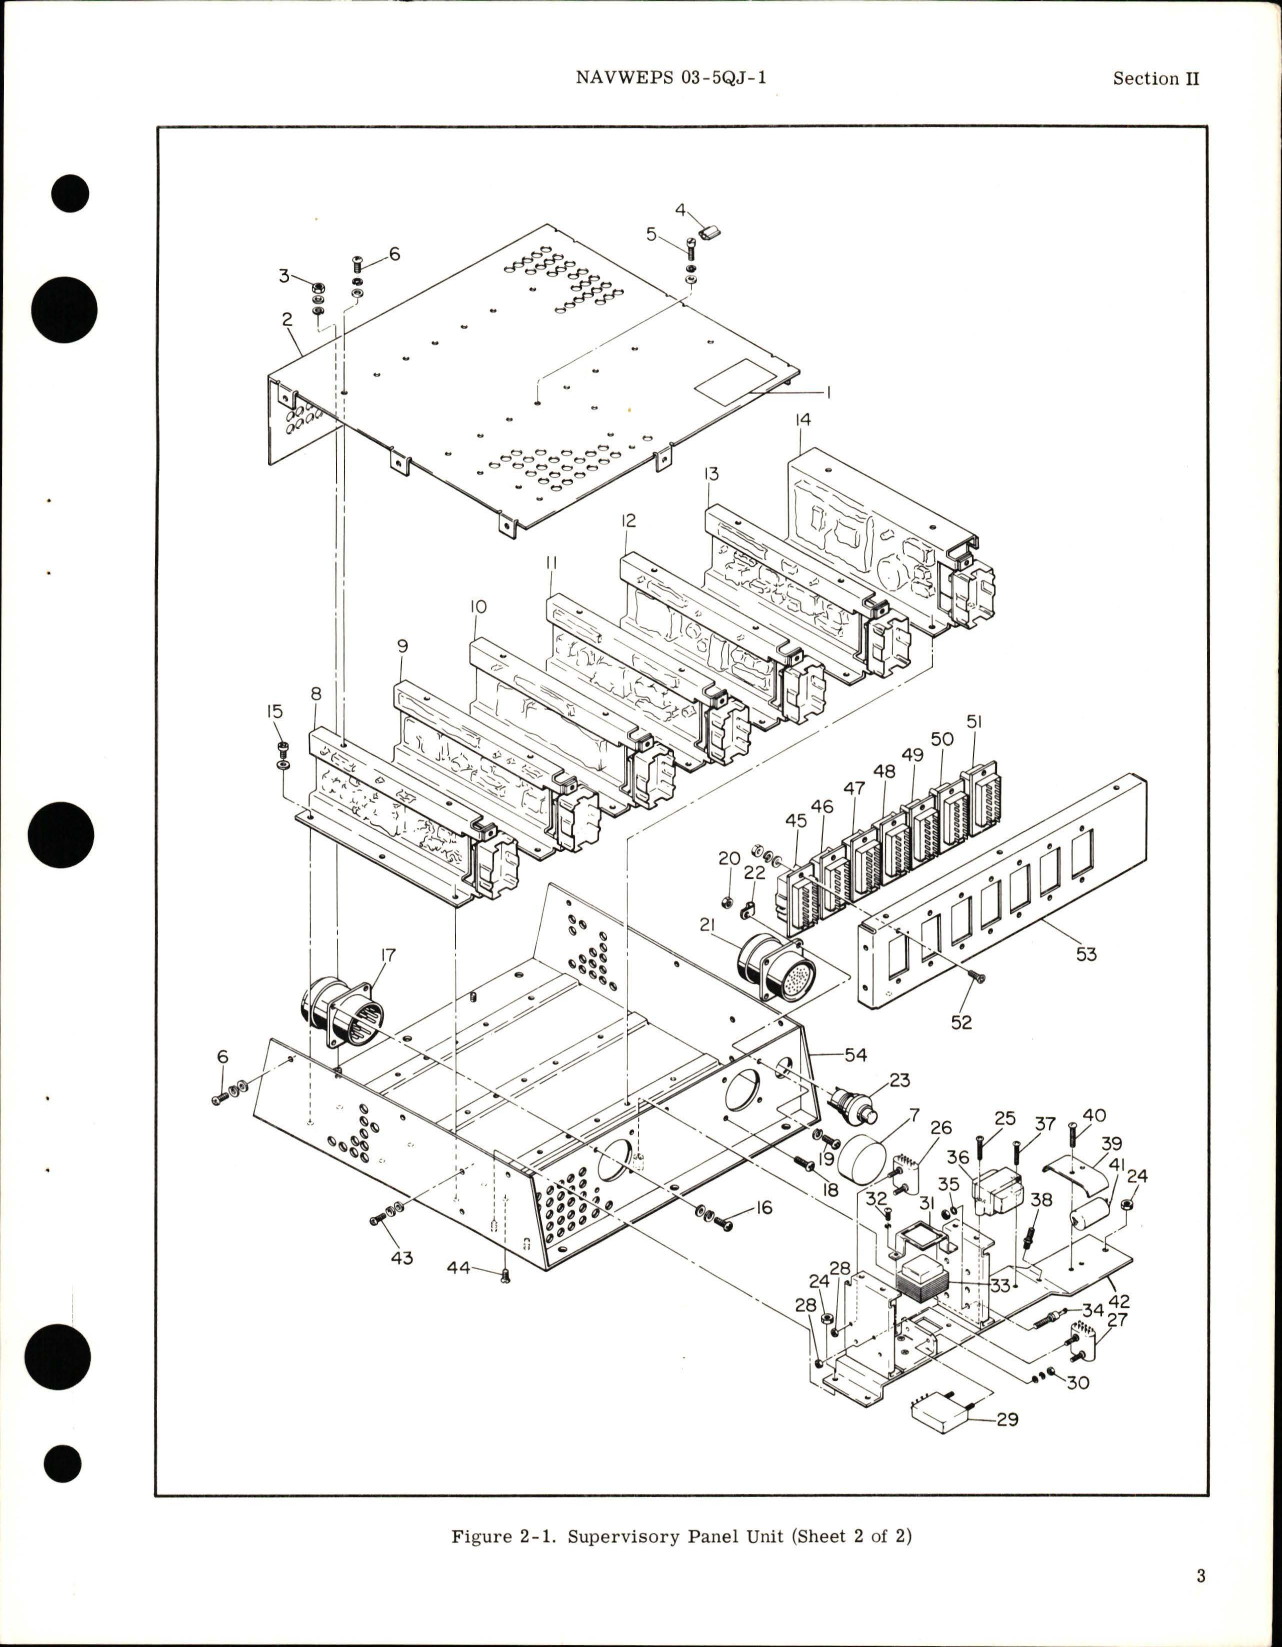 Sample page 7 from AirCorps Library document: Overhaul Instructions for Supervisory Panel Unit - Part CSV1015-1